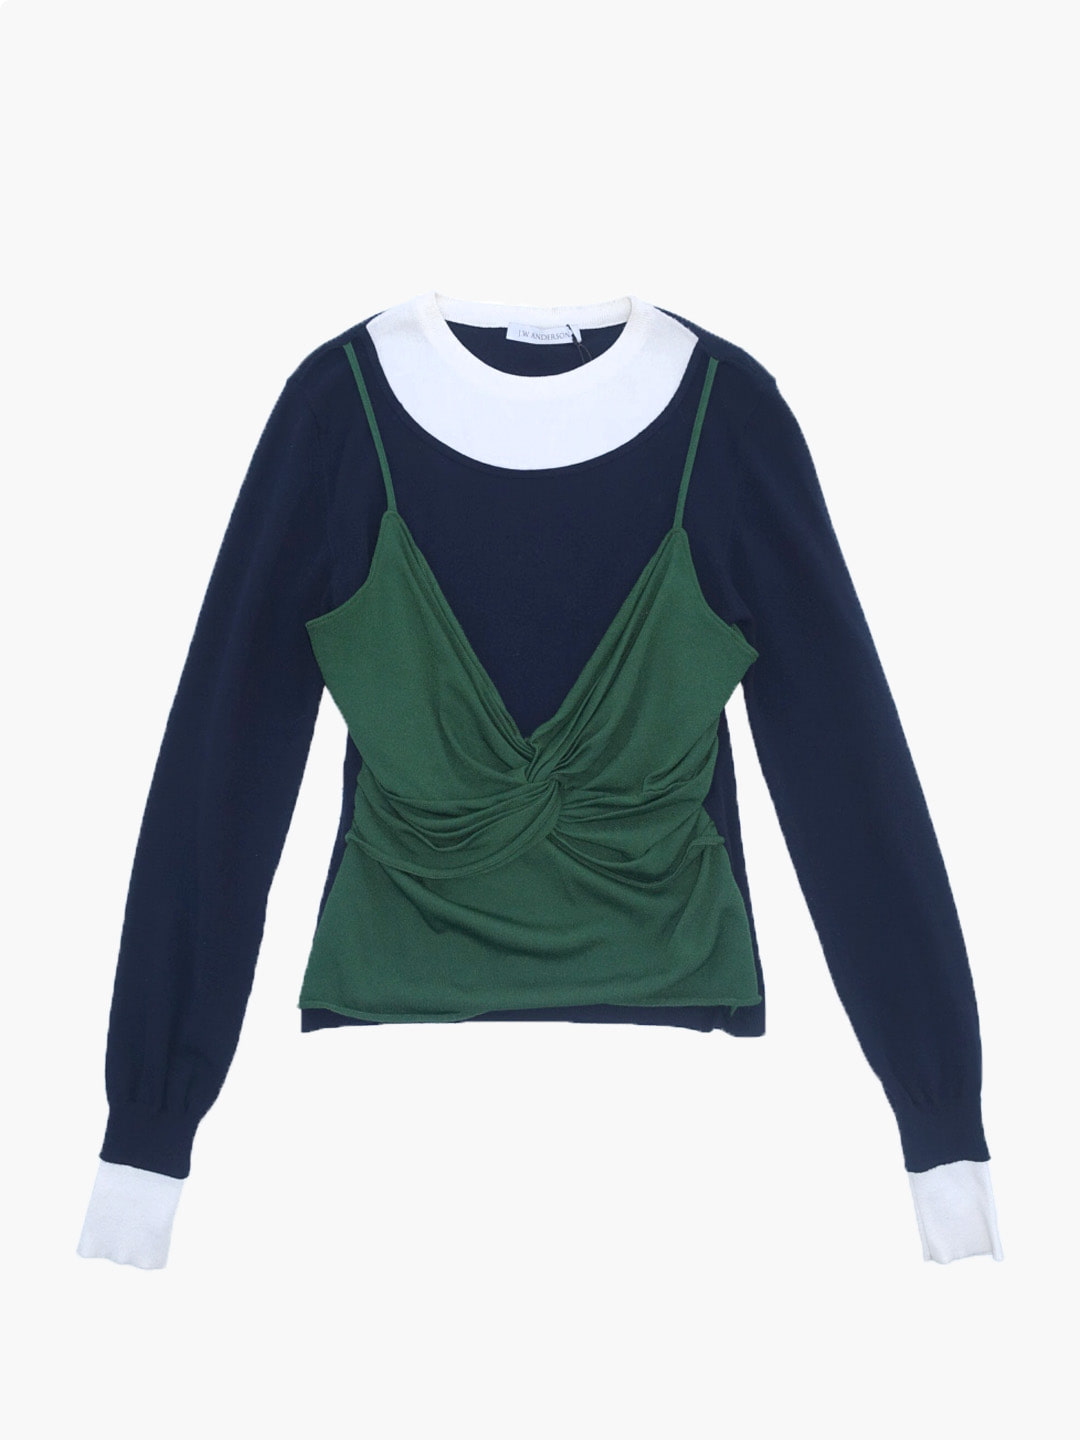 JW ANDERSONBustier layered knit top